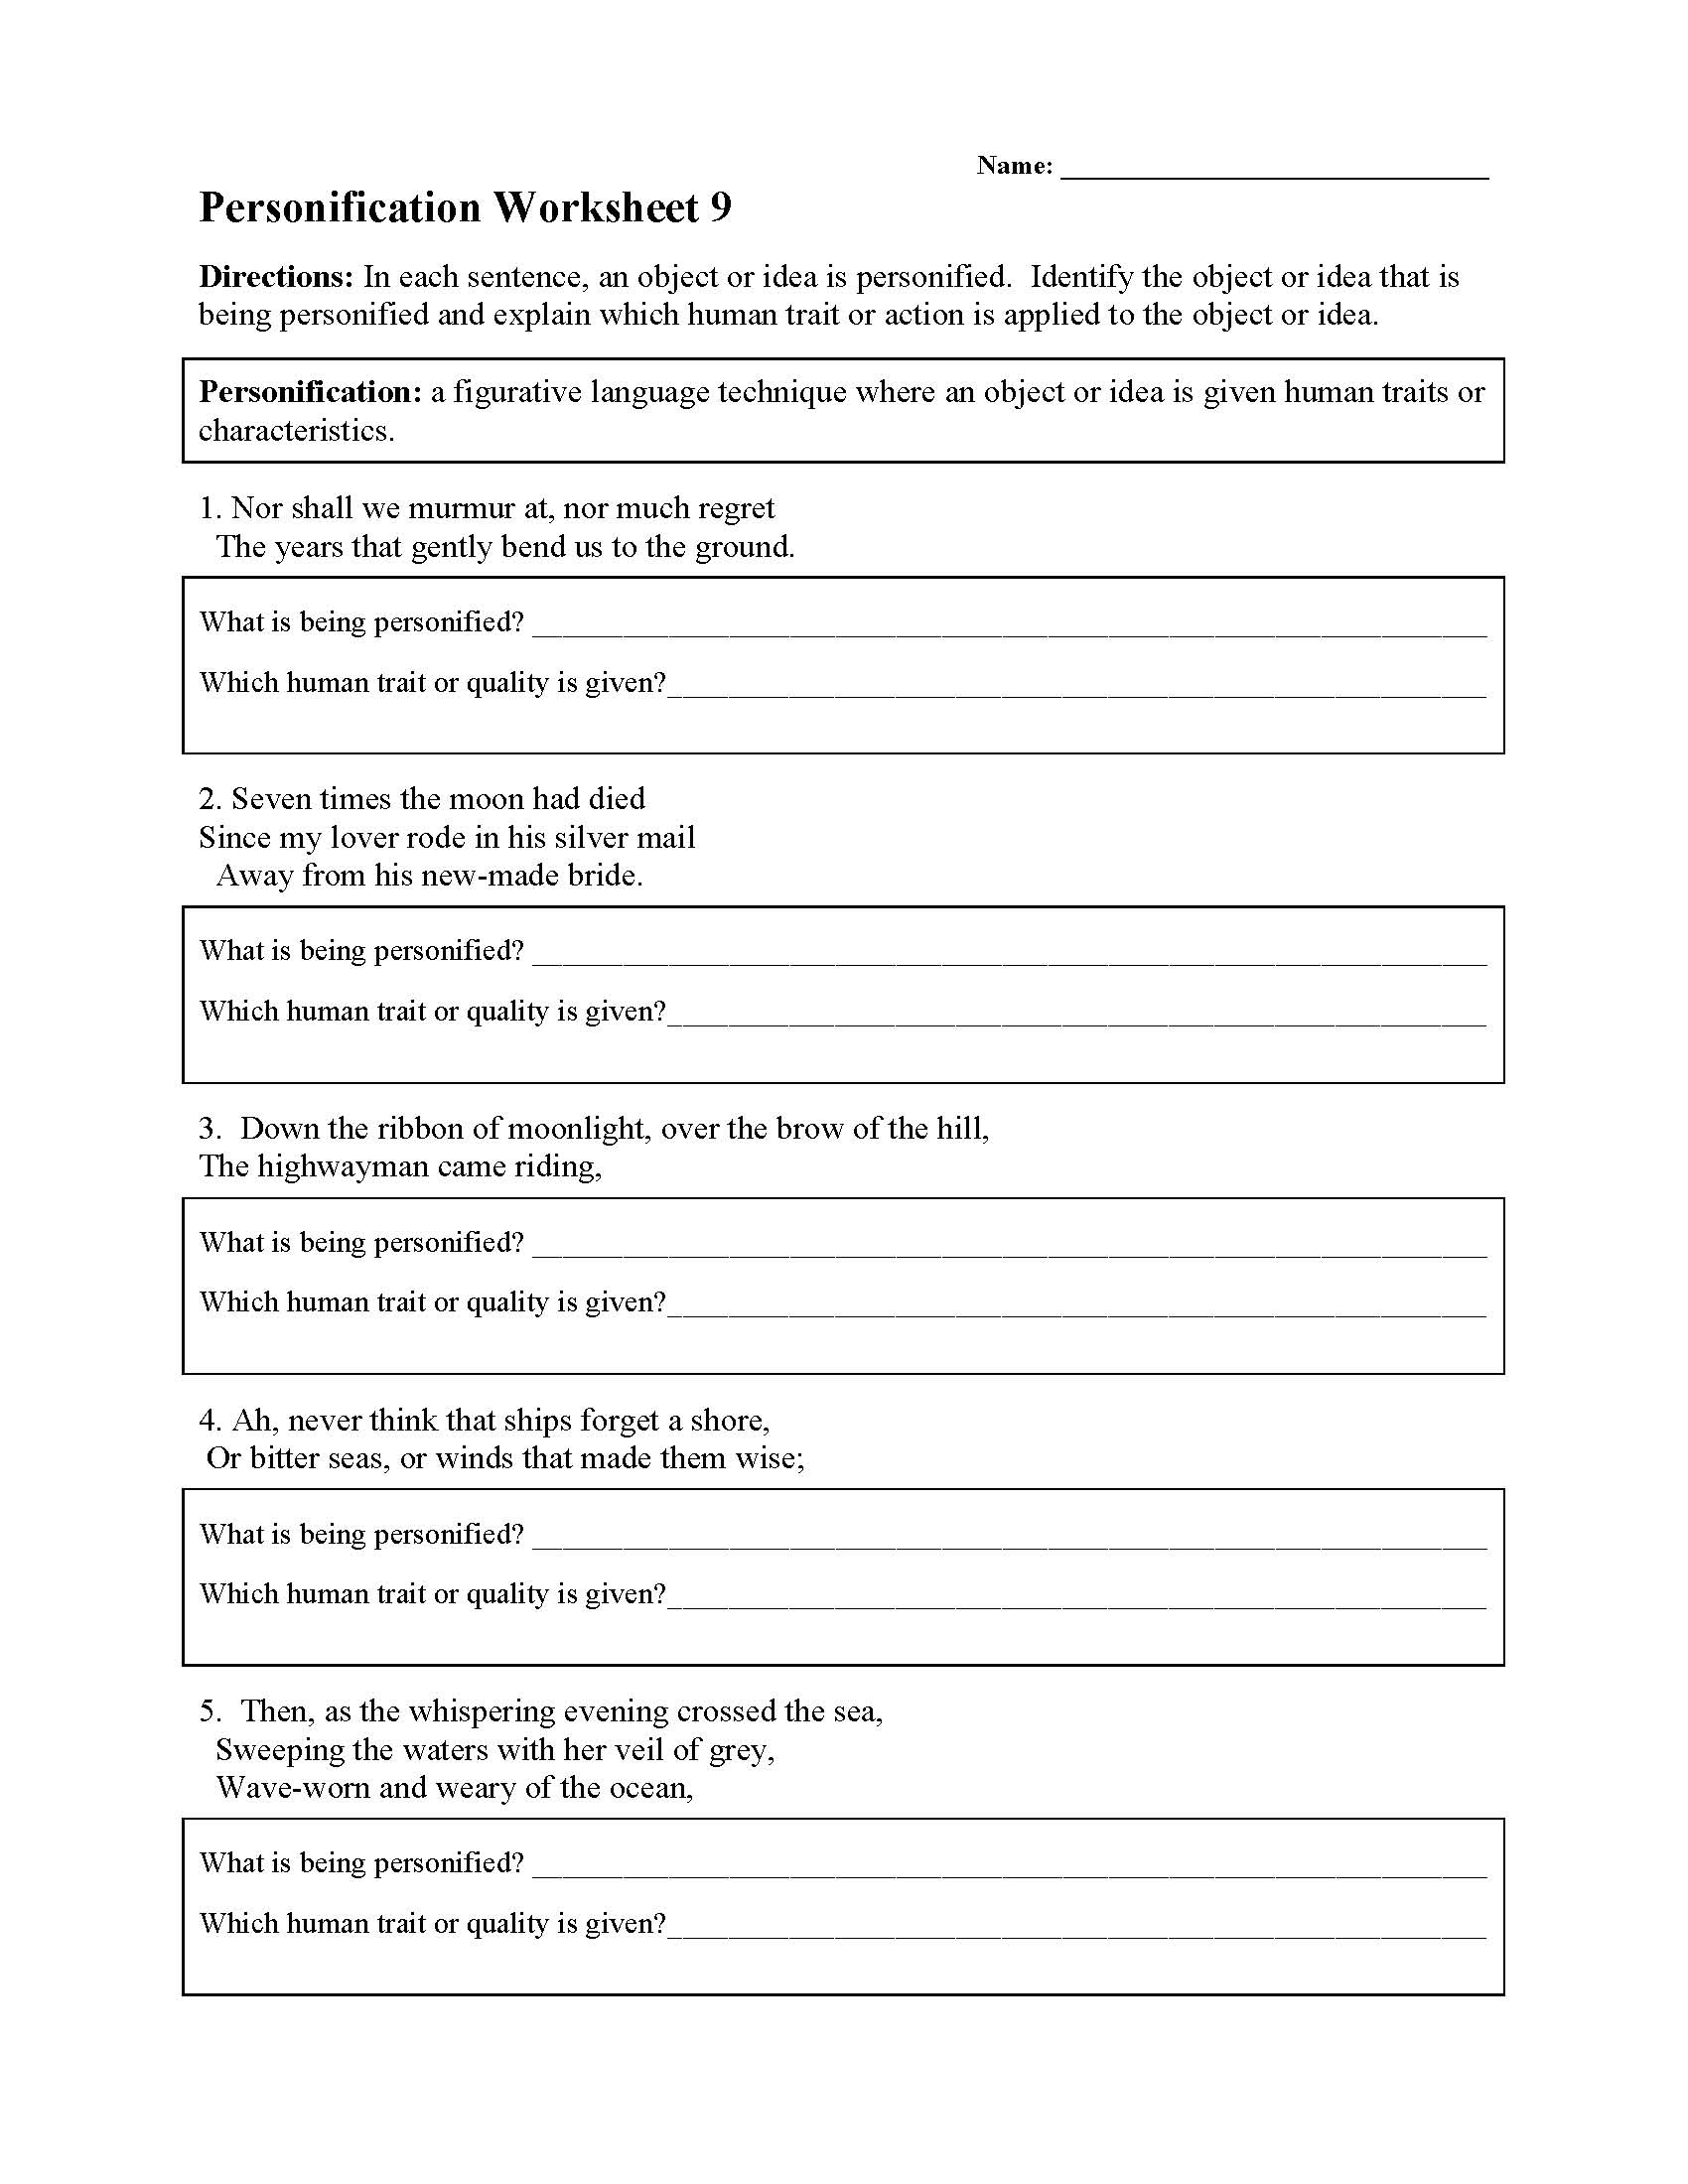 This is a preview image of Personification Worksheet 9. Click on it to enlarge it or view the source file.